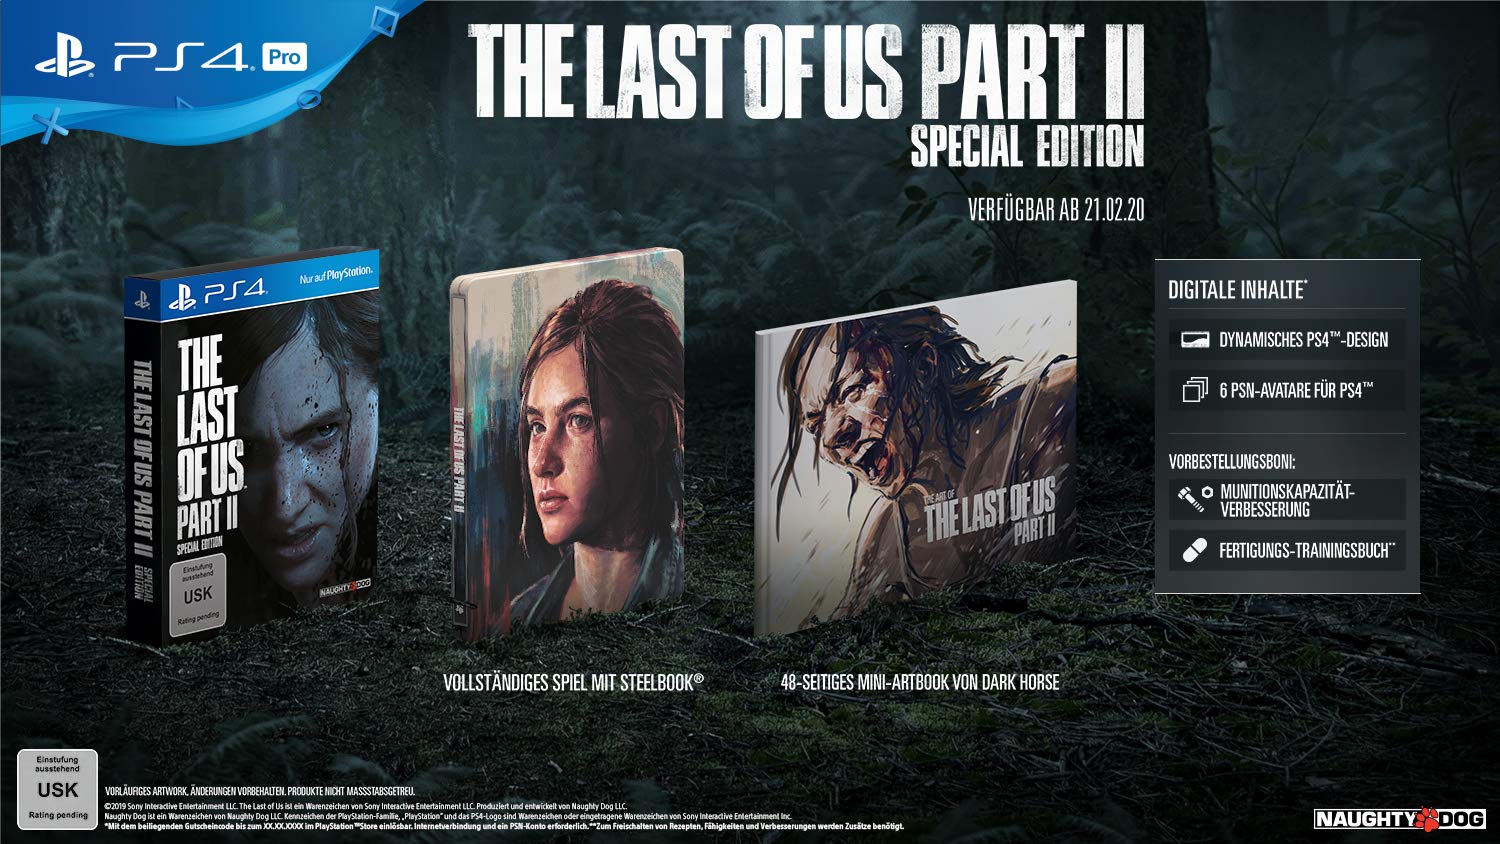 The Last of Us Part II - Special Edition